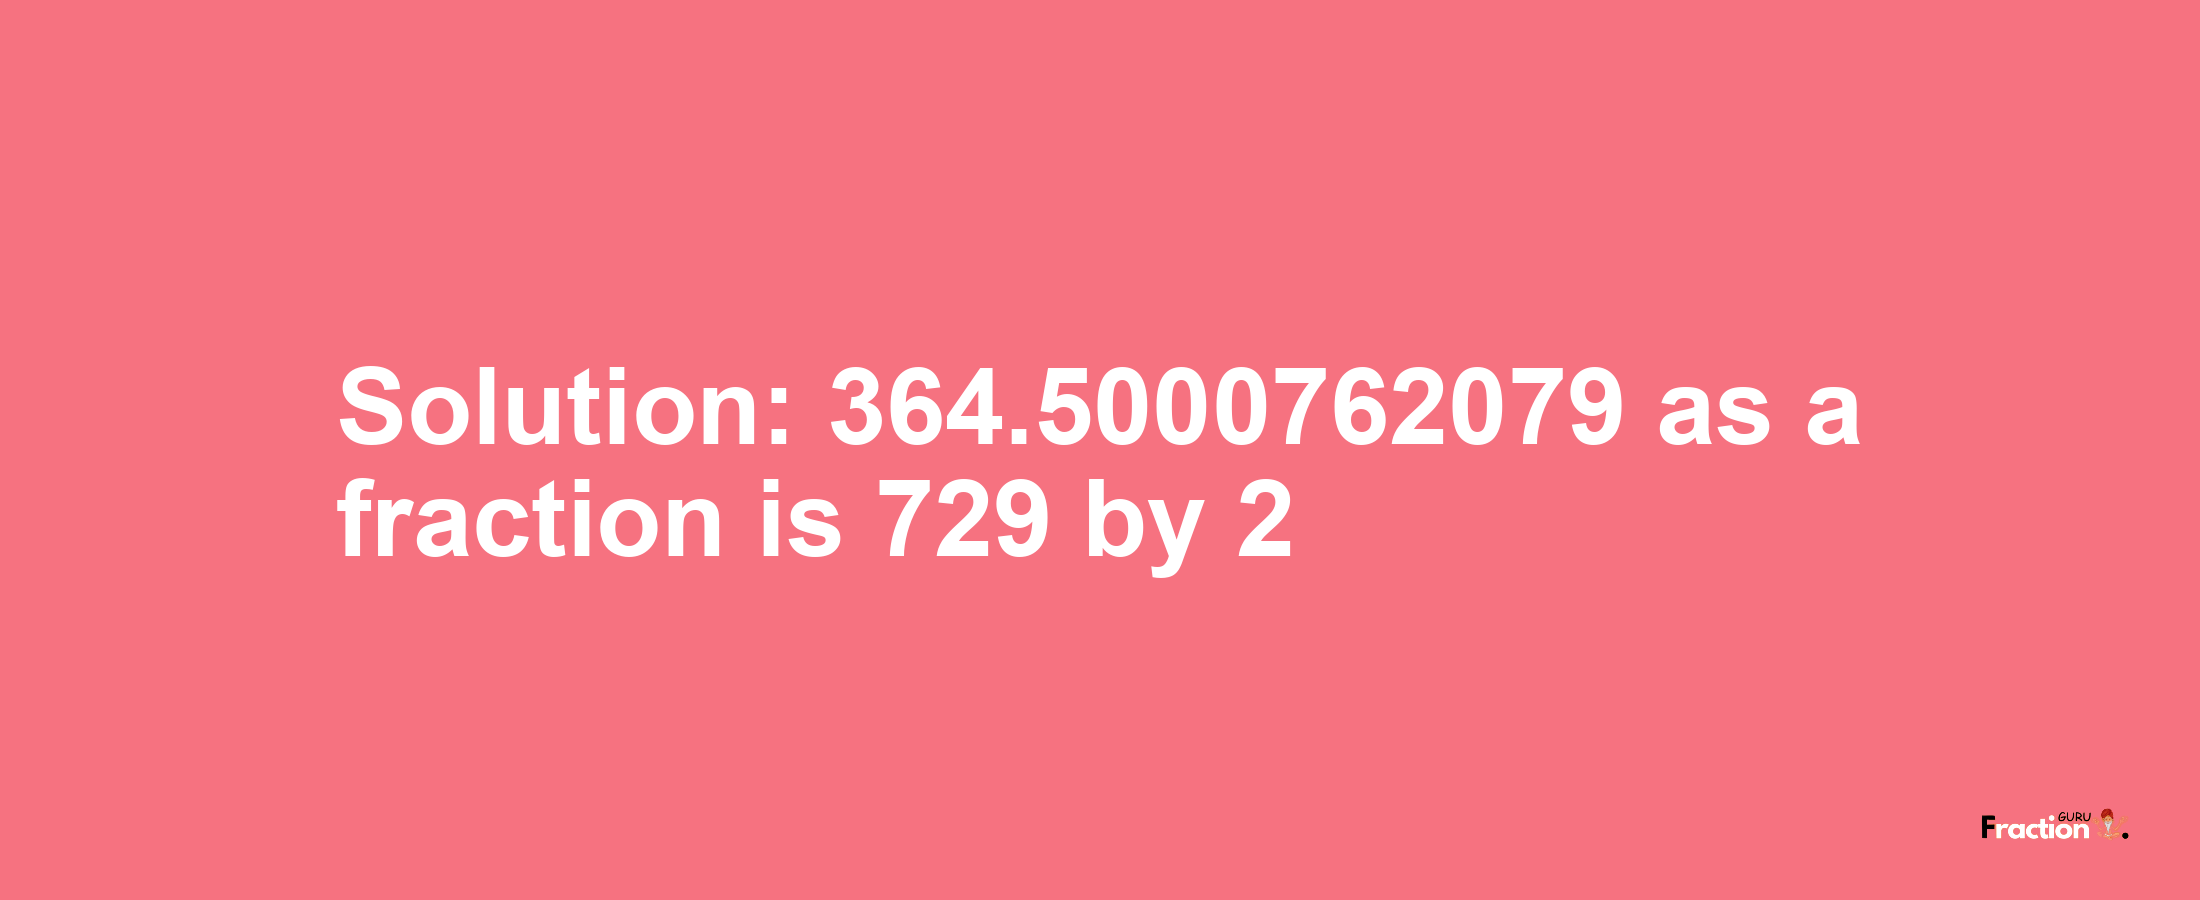 Solution:364.5000762079 as a fraction is 729/2